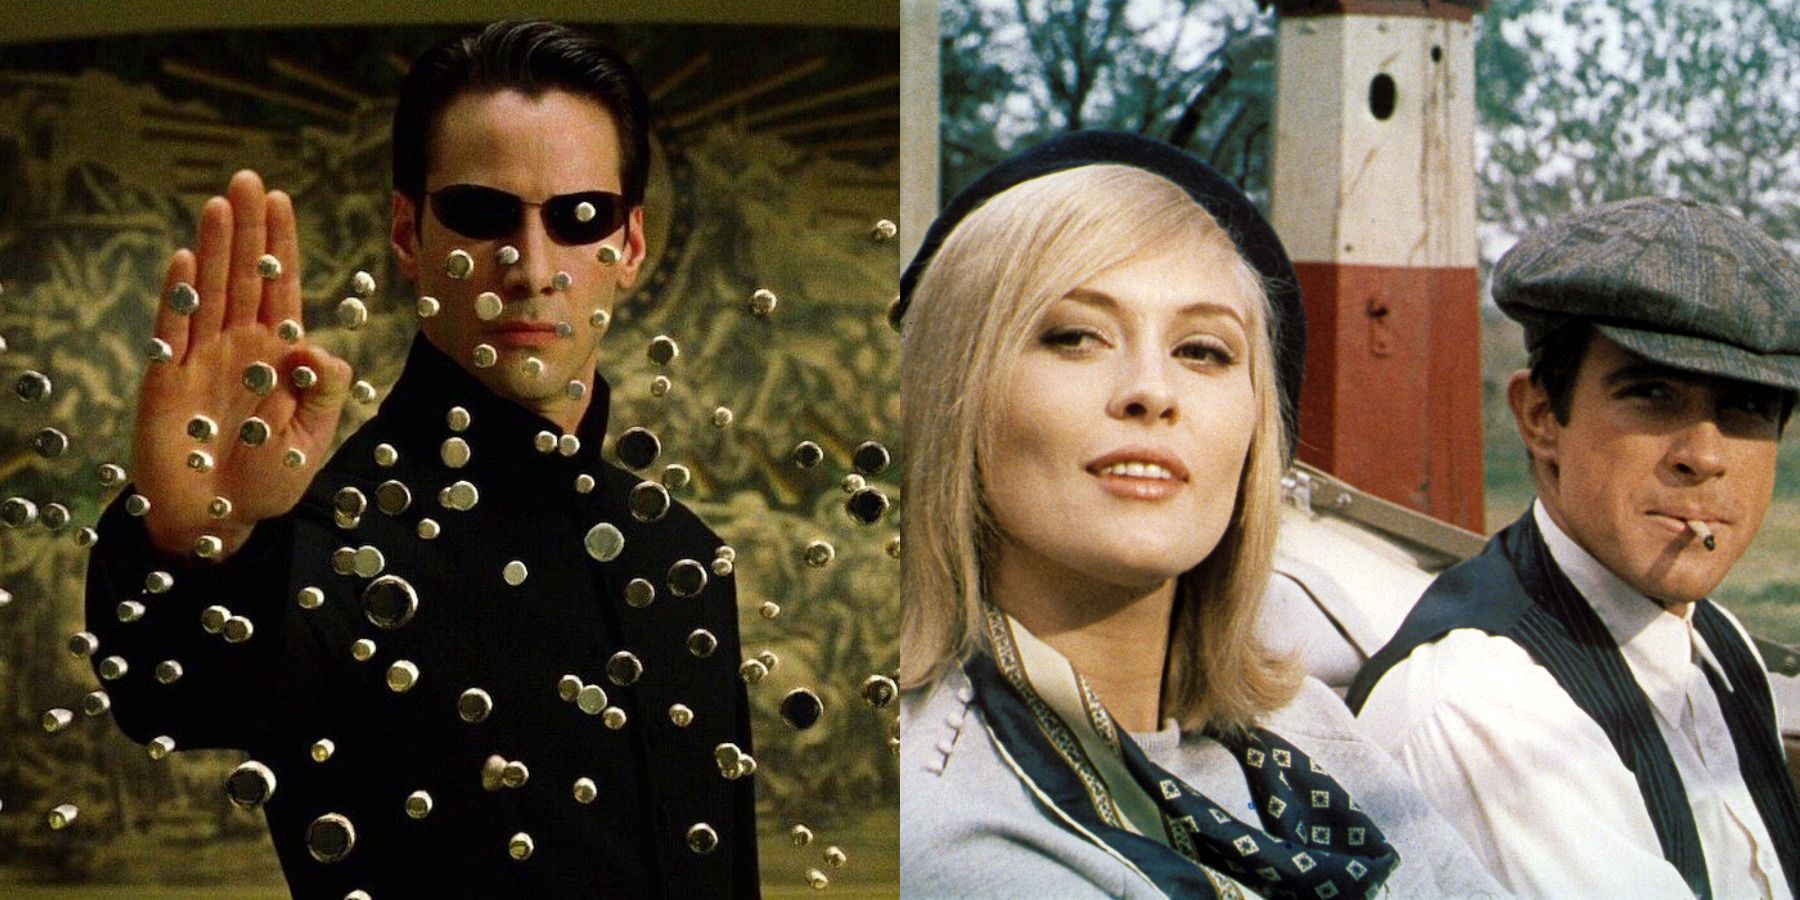 Best slow-motion scenes in movies feature split image Matrix and Bonnie and Clyde